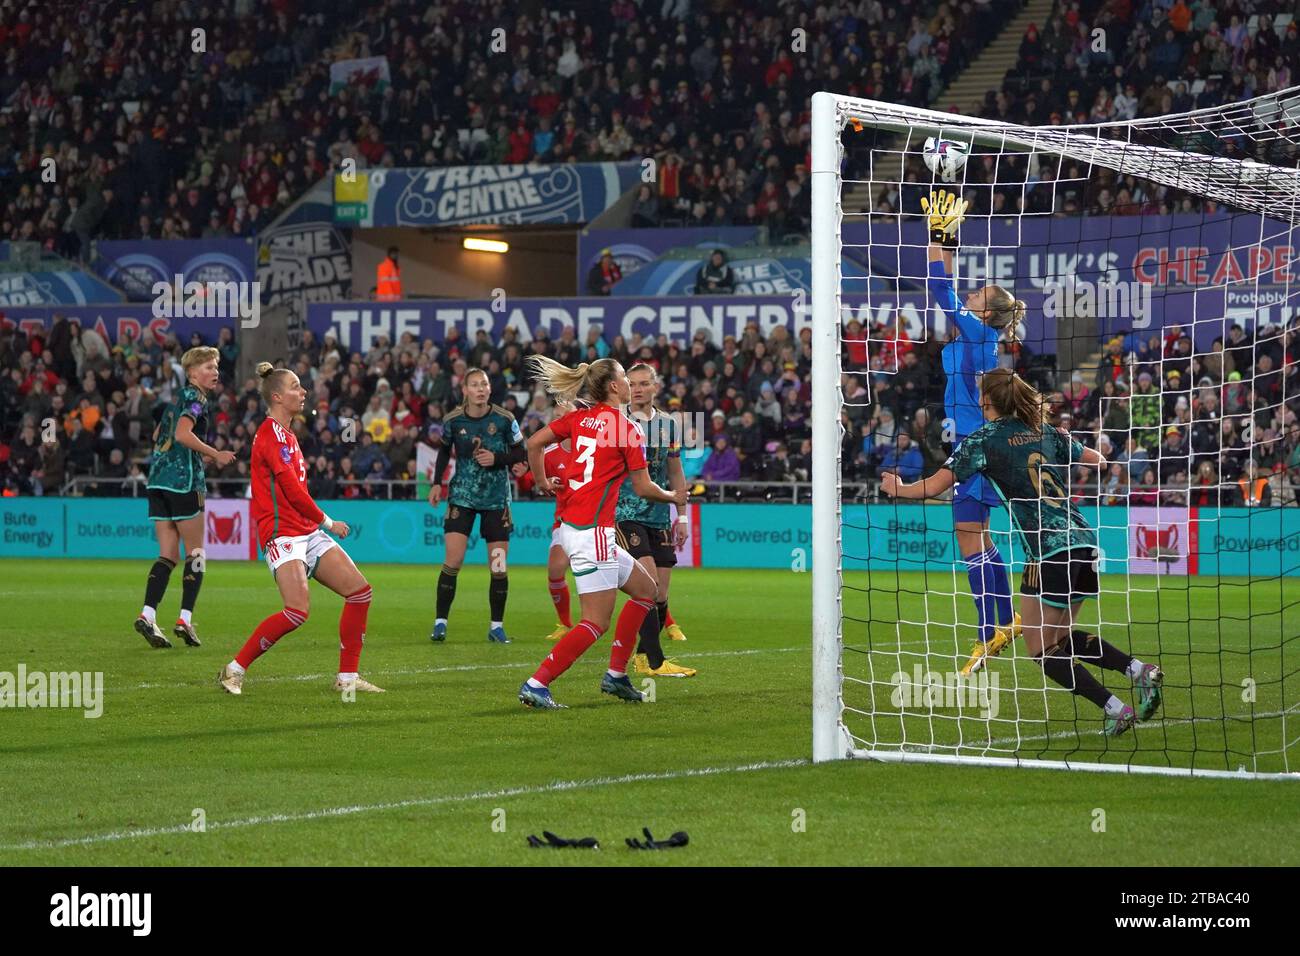 Swansea, Wales. UK. 05th Dec, 2023. Goal keeper Merle Frohms saves a shot  during Wales' draw with Germany in Swansea, Dec 5th 2023.  Credit Alamy Lve News / Penallta Photographics Credit: Penallta Photographics/Alamy Live News Stock Photo